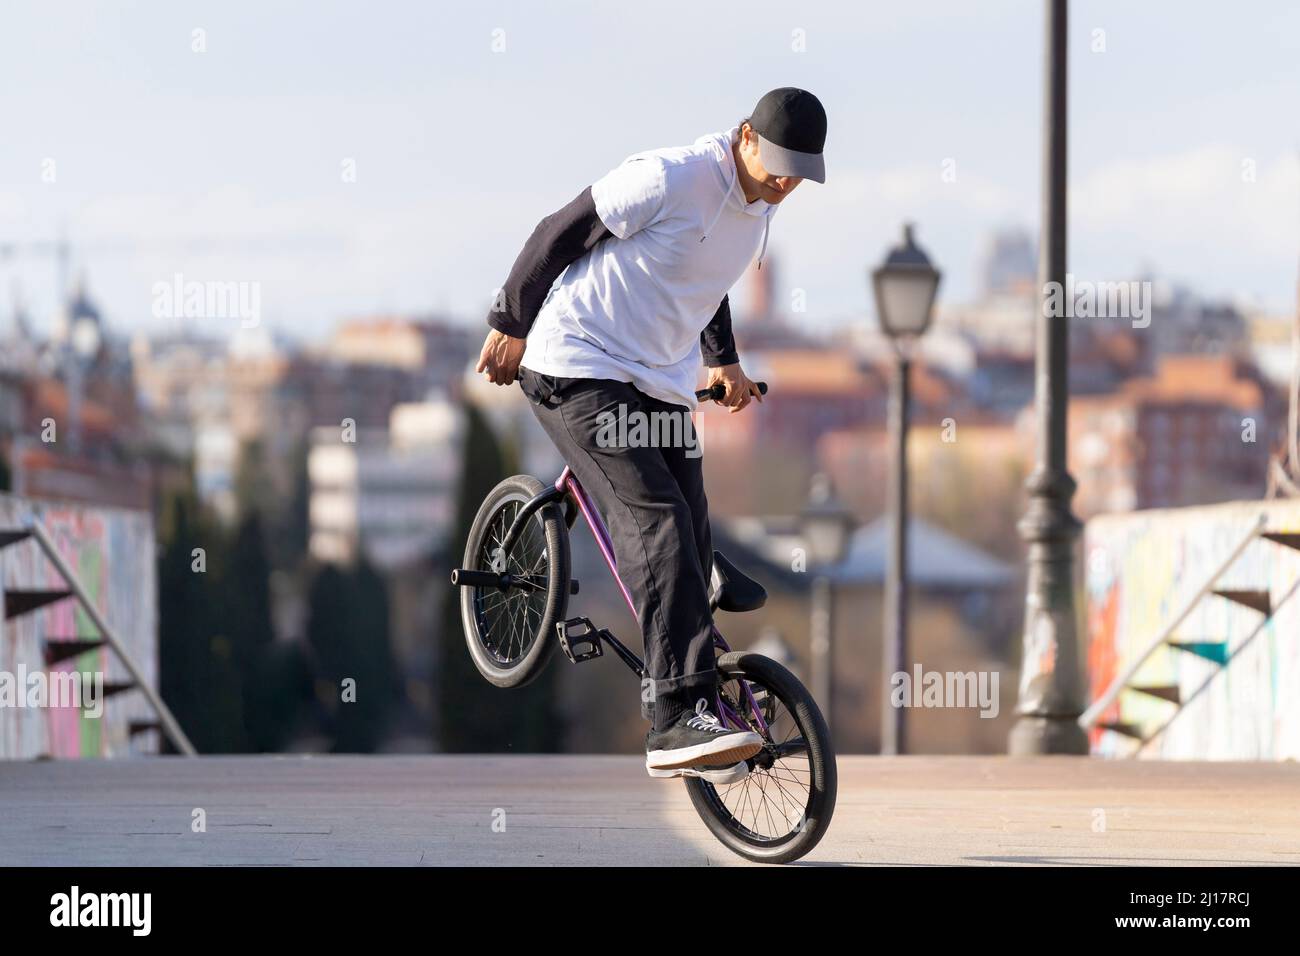 Determinant man doing trick on bicycle in city Stock Photo